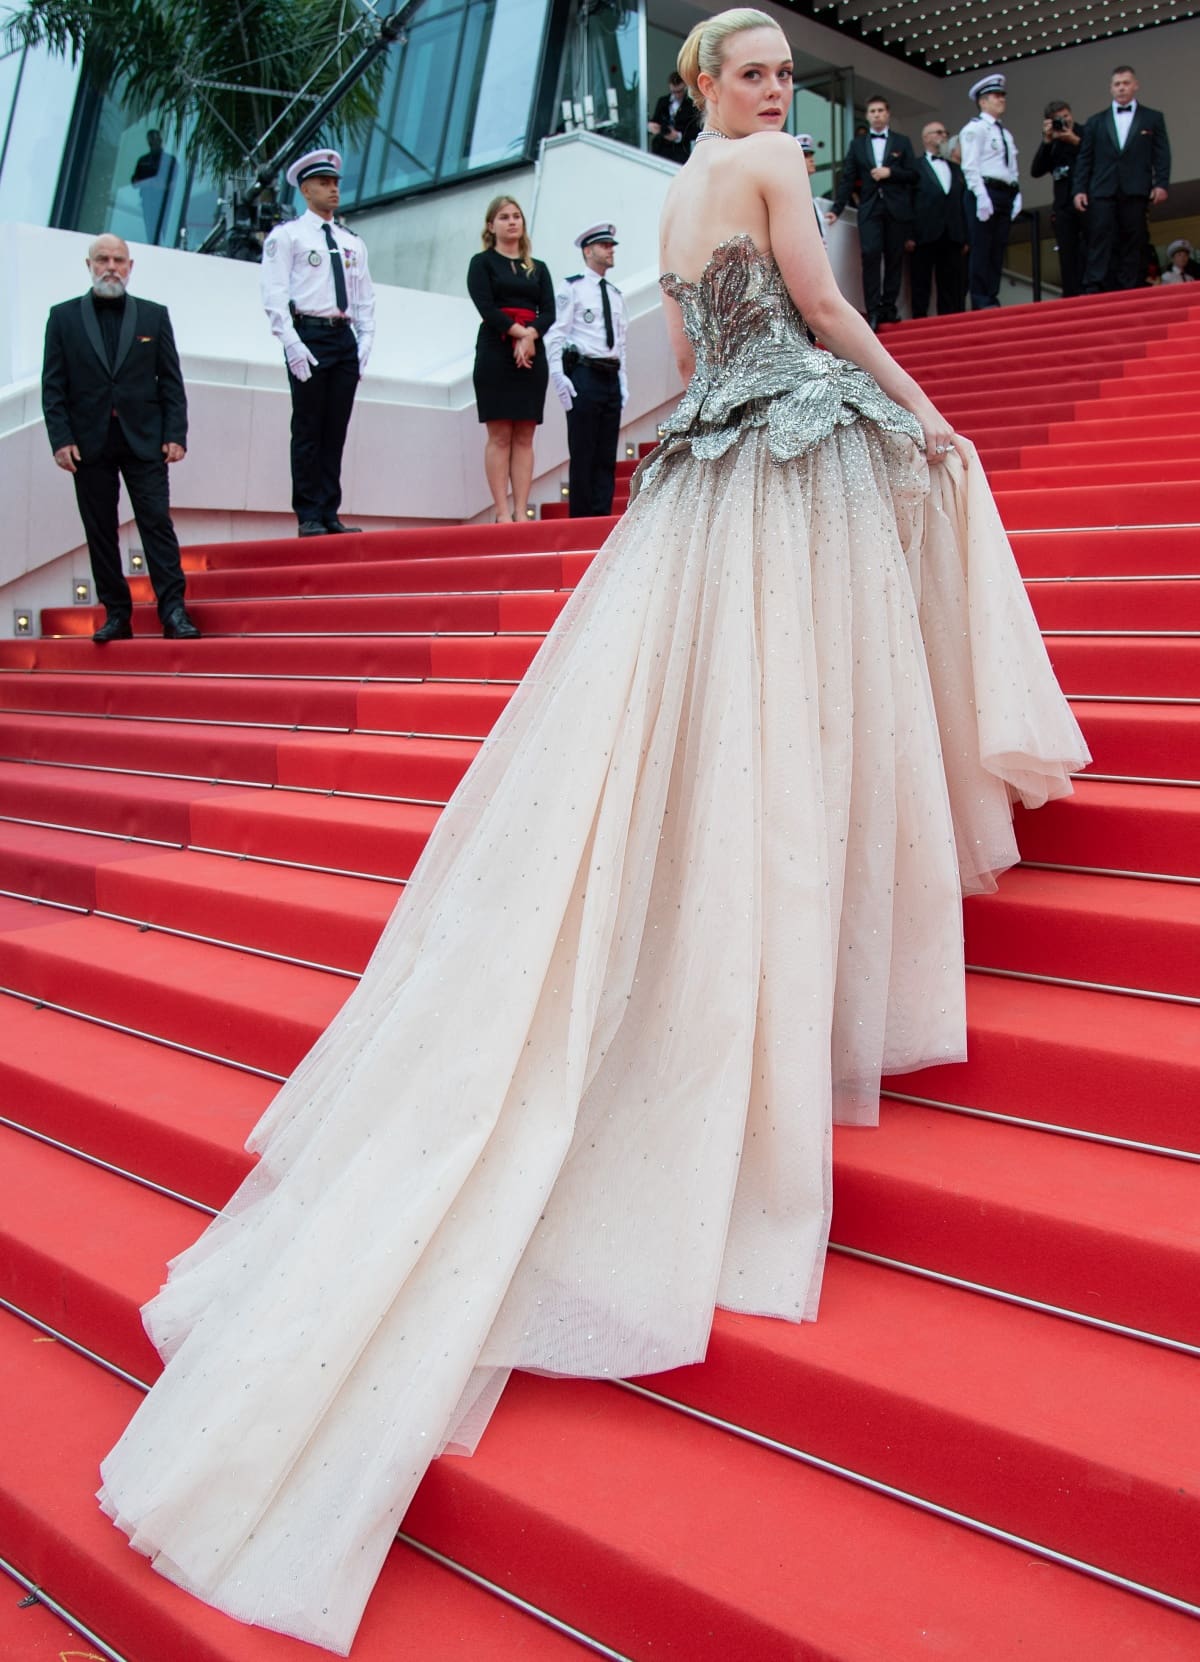 The Alexander McQueen gown’s tulle train trailed behind Elle Fanning as she went up the iconic steps at this year’s Cannes Film Festival